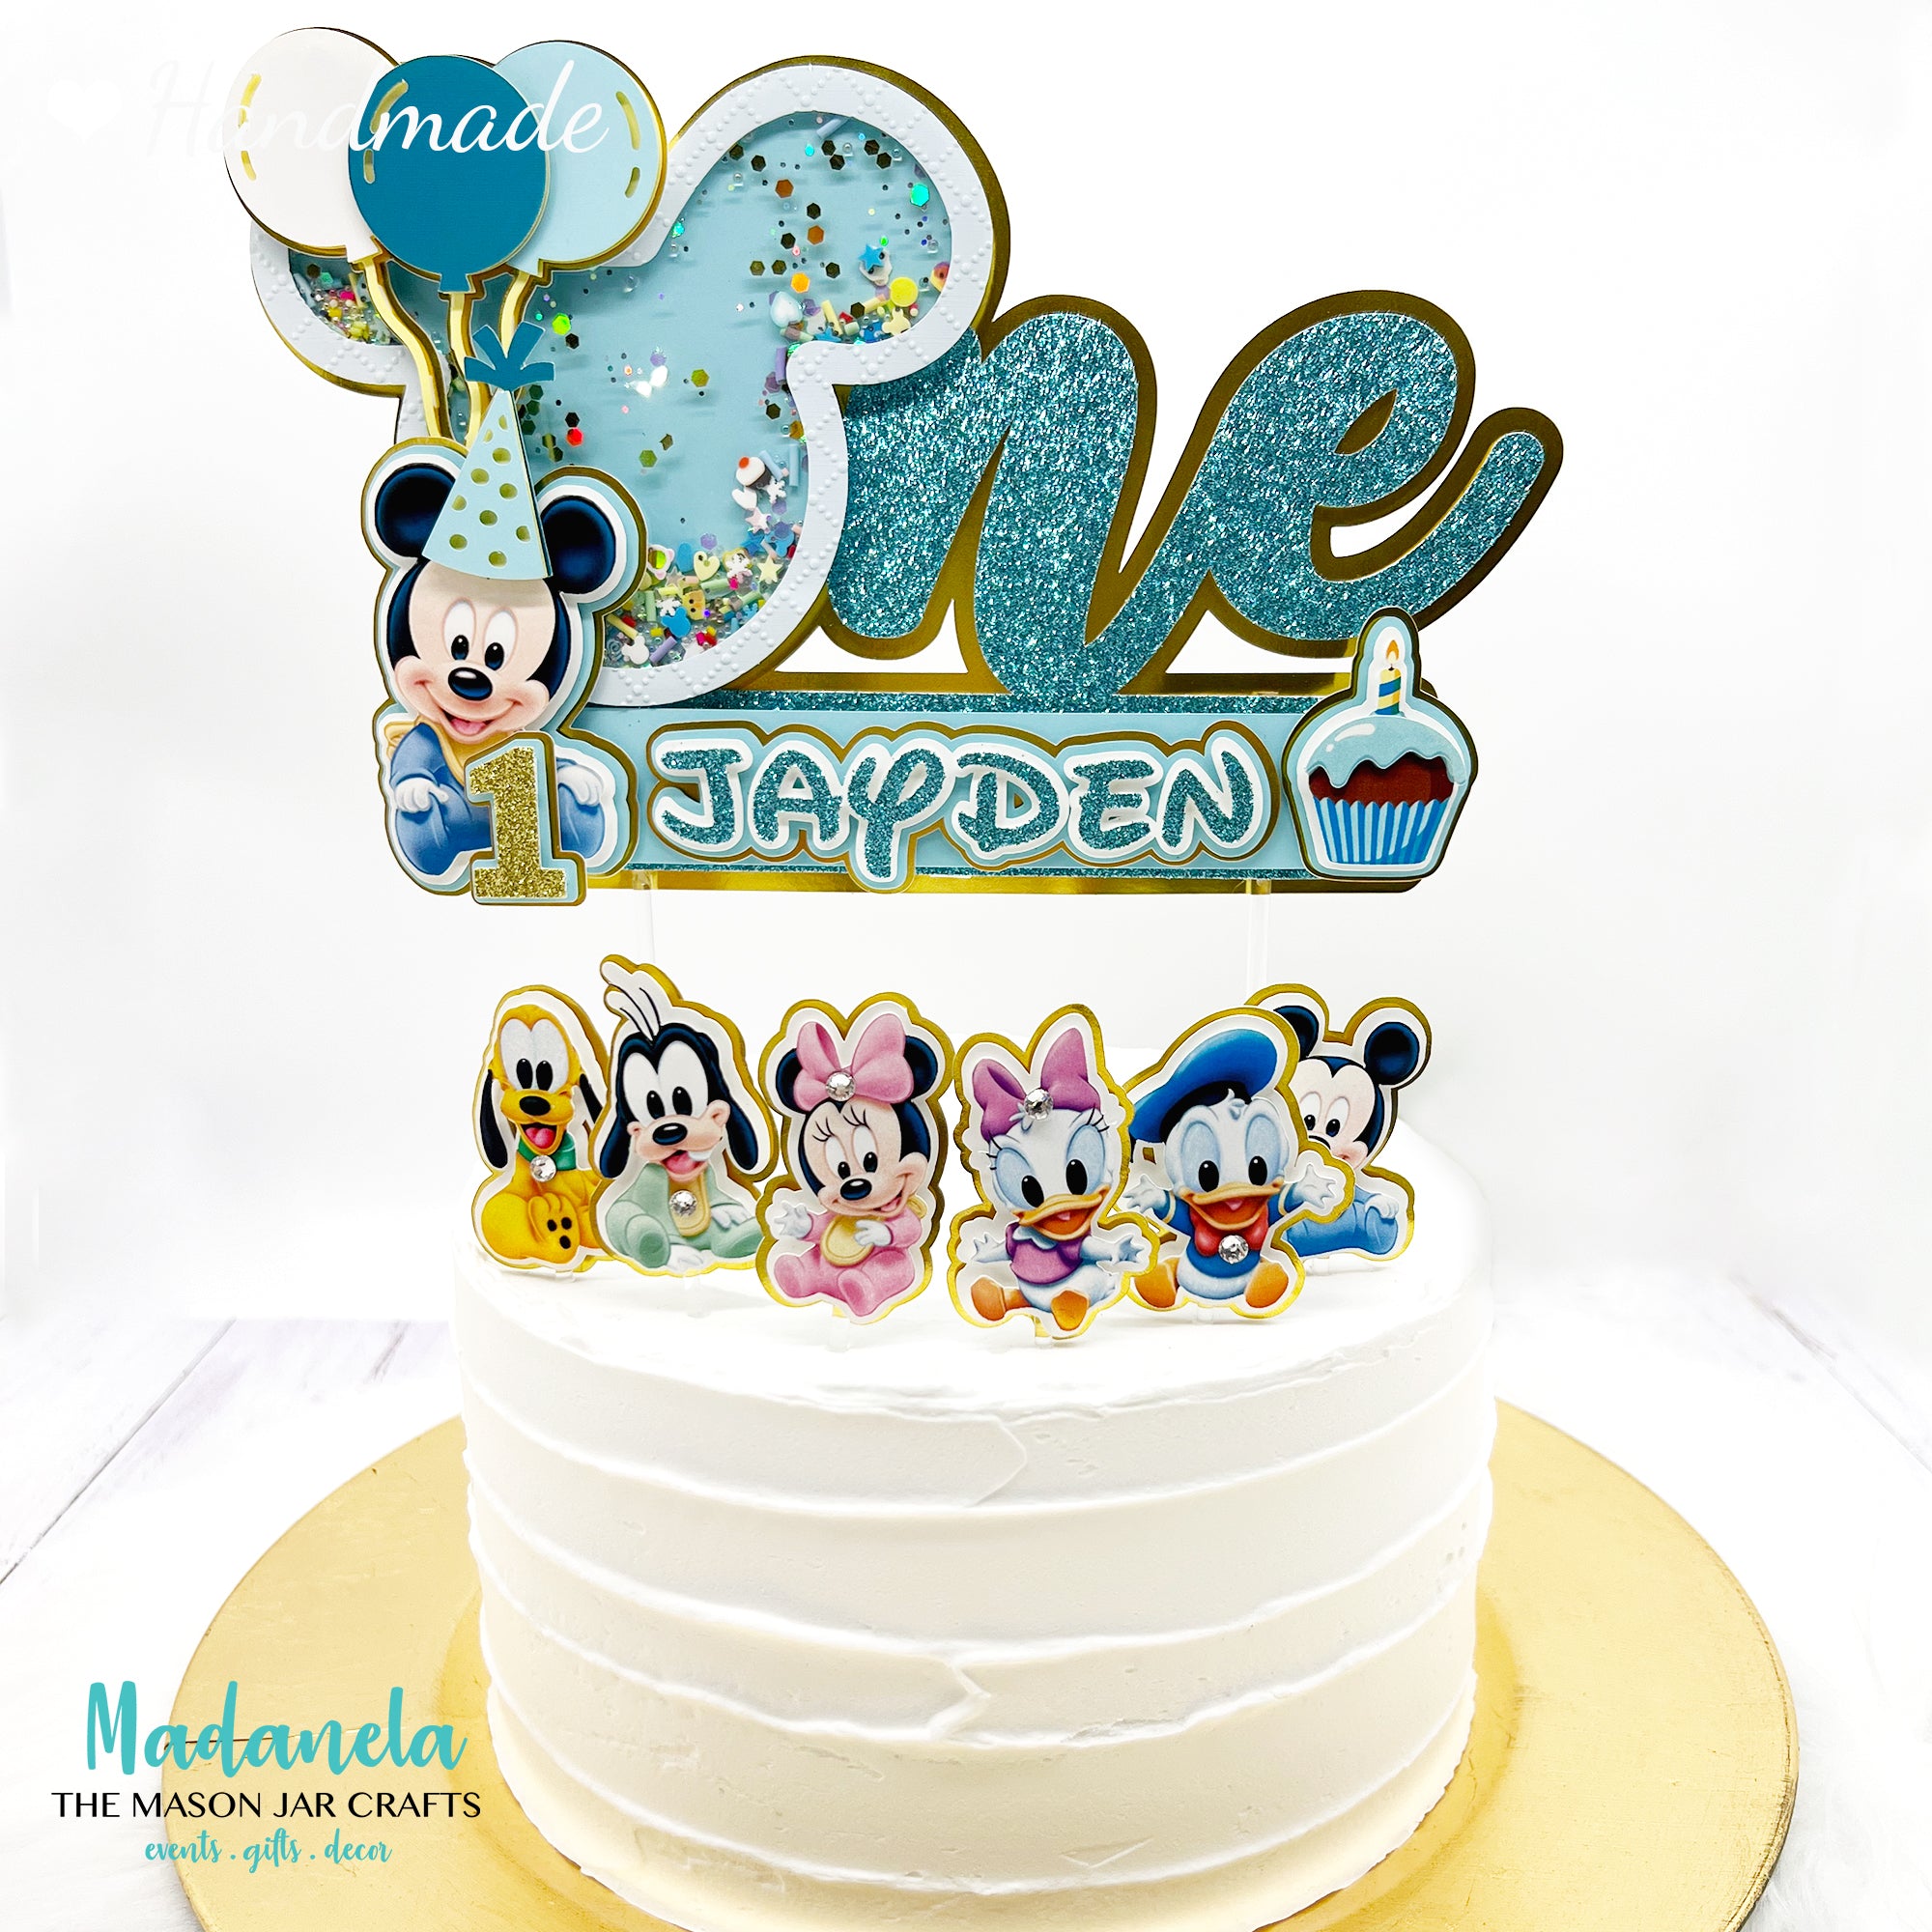 Mickey Mouse Cake 5 kg